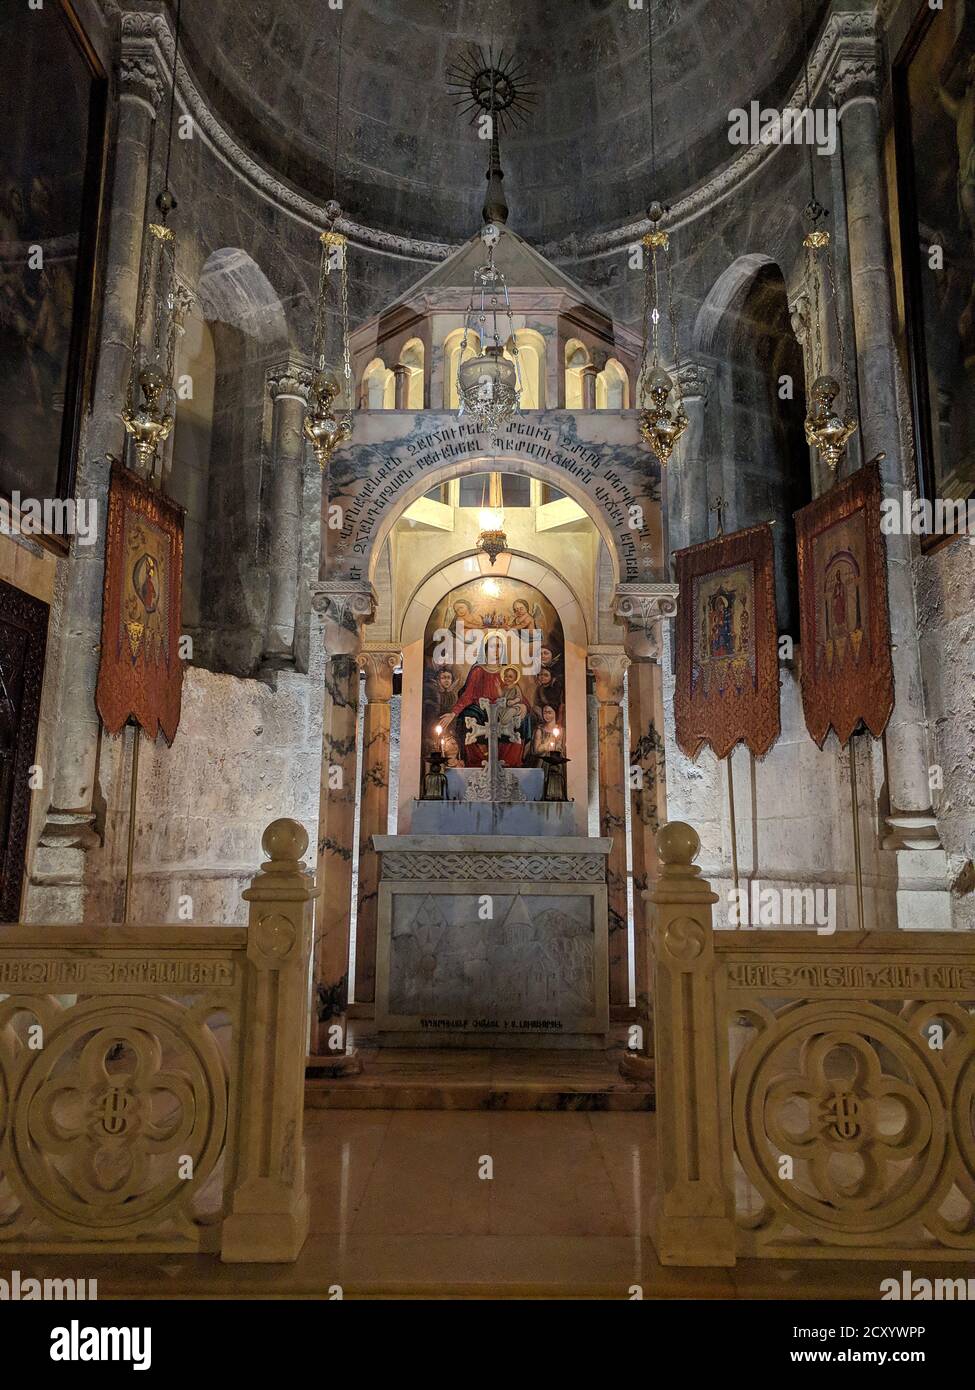 Division of the Raiment or parting of the garments chapel in the Church of the Holy Sepulchre in the Holy Land Jerusalem Stock Photo